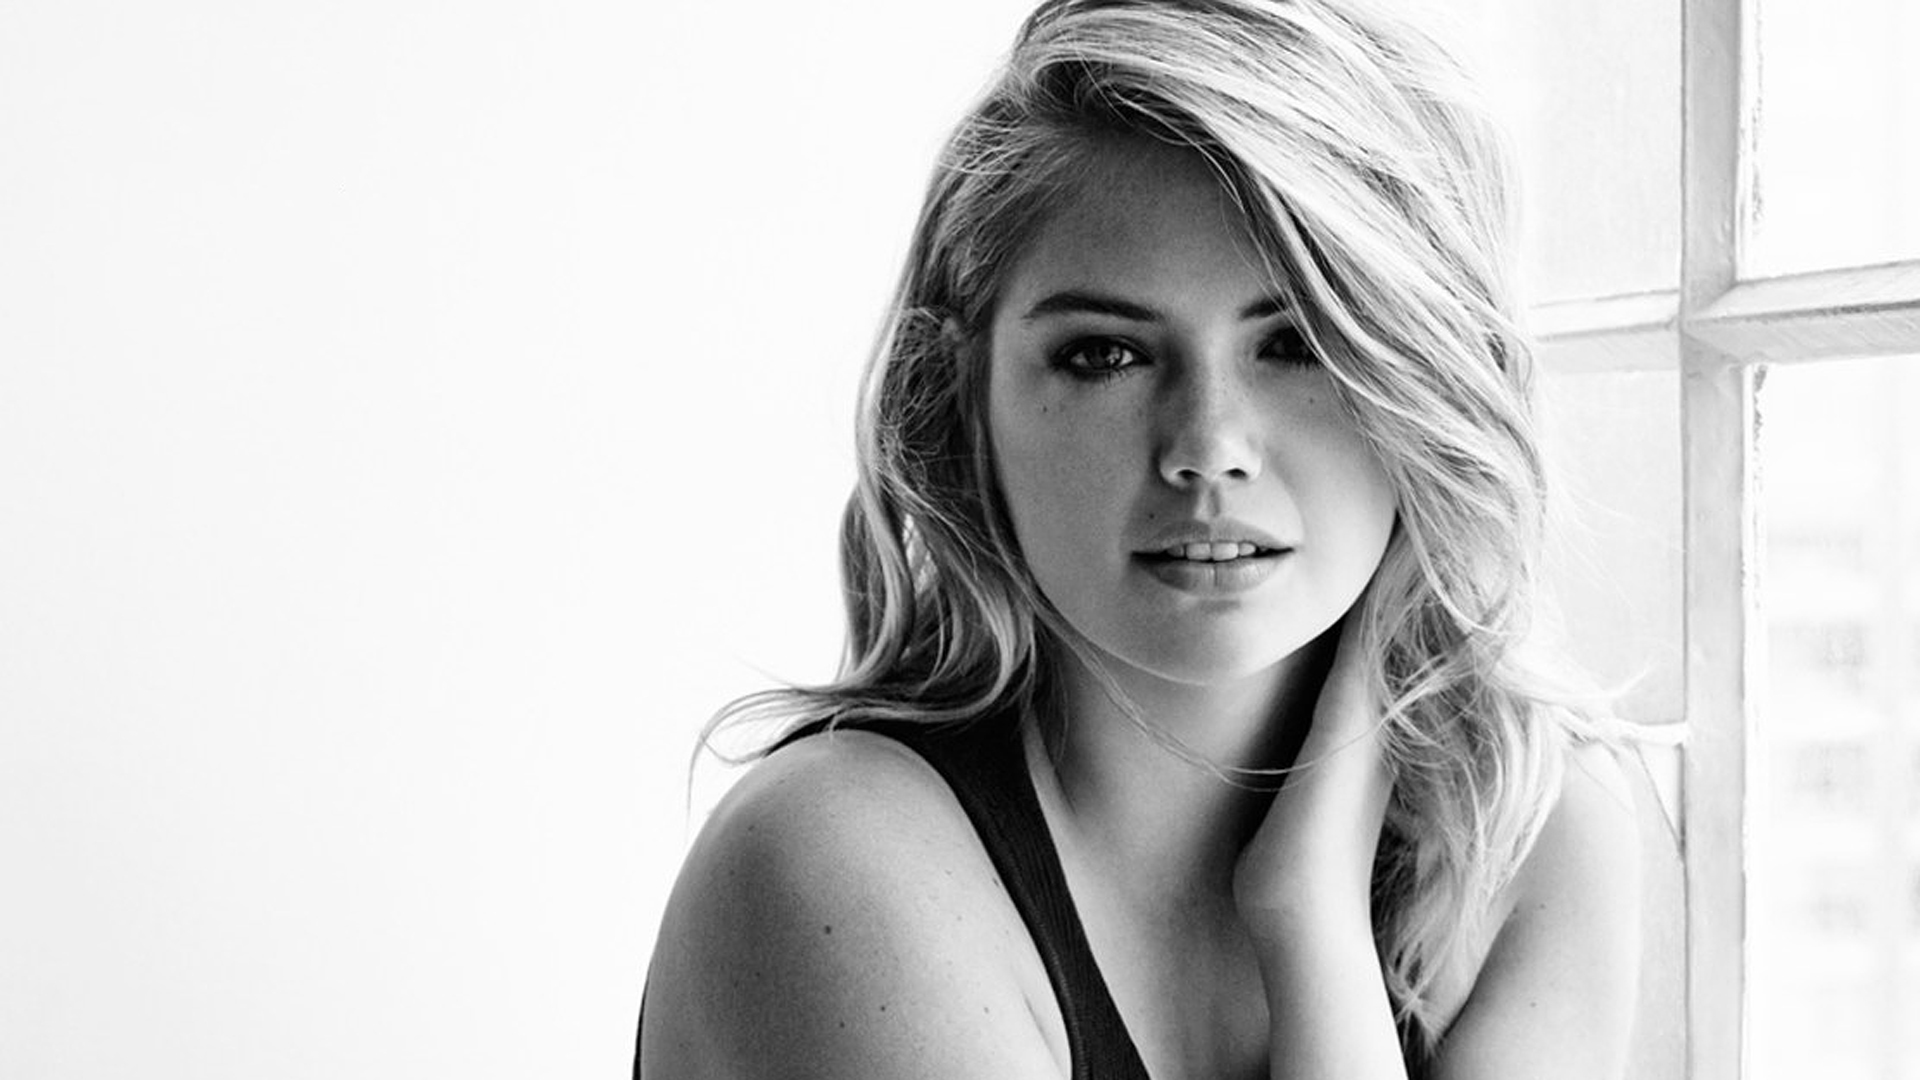 Kate upton black and white hd wallpaper background x px